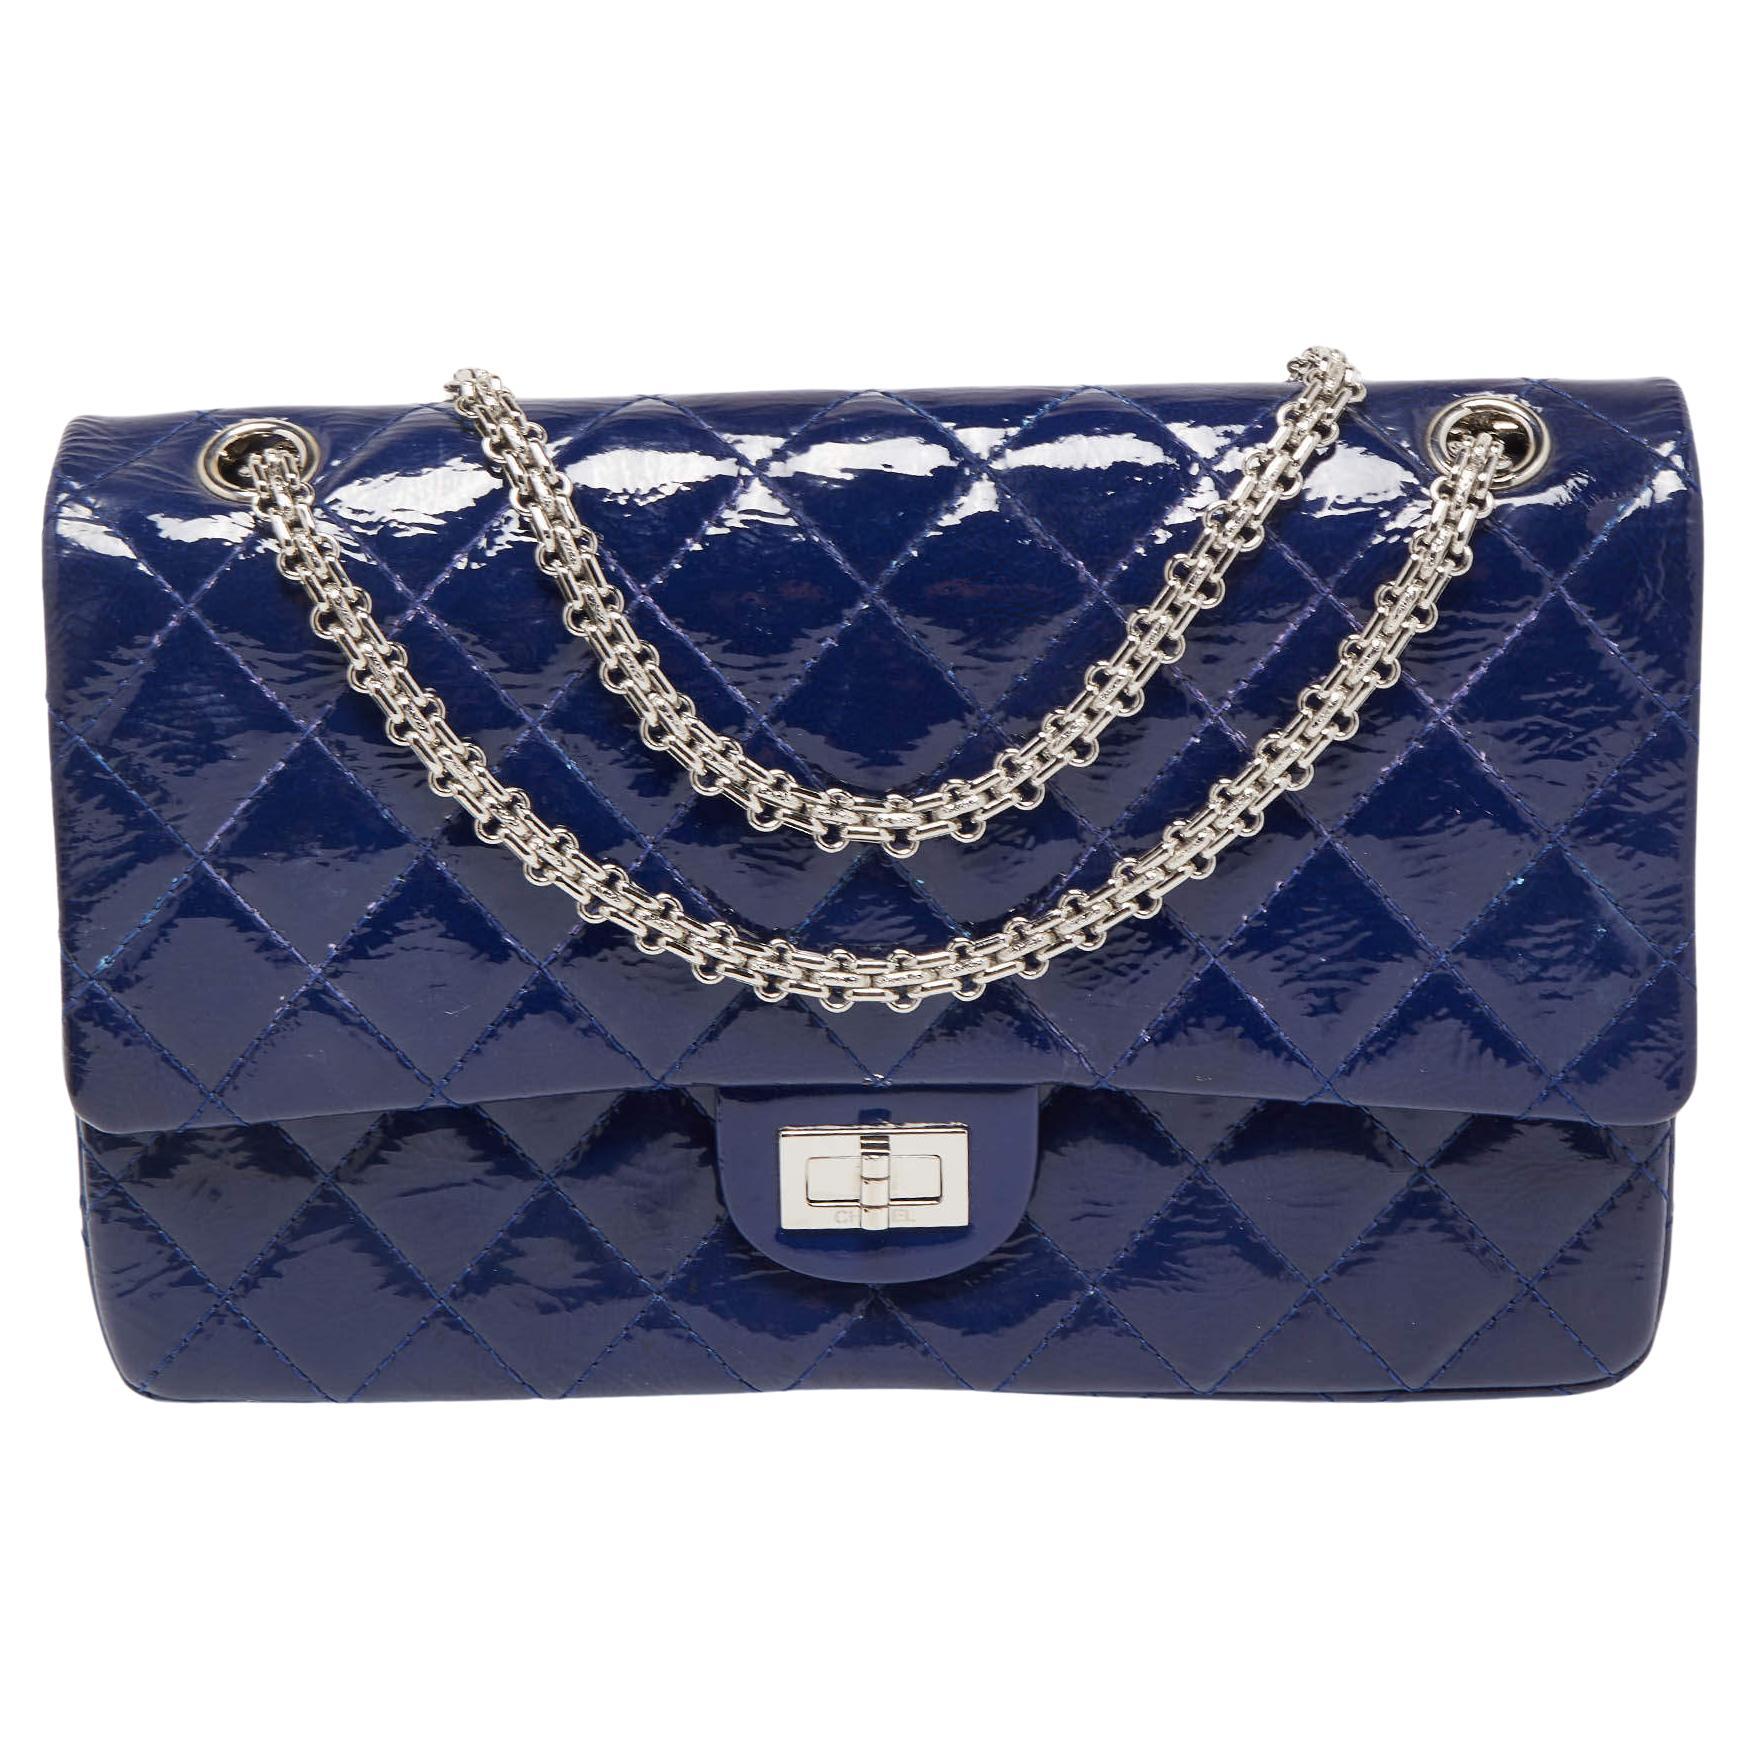 Chanel Blue Quilted Patent Leather Reissue 2.55 Classic 226 Flap Bag For Sale